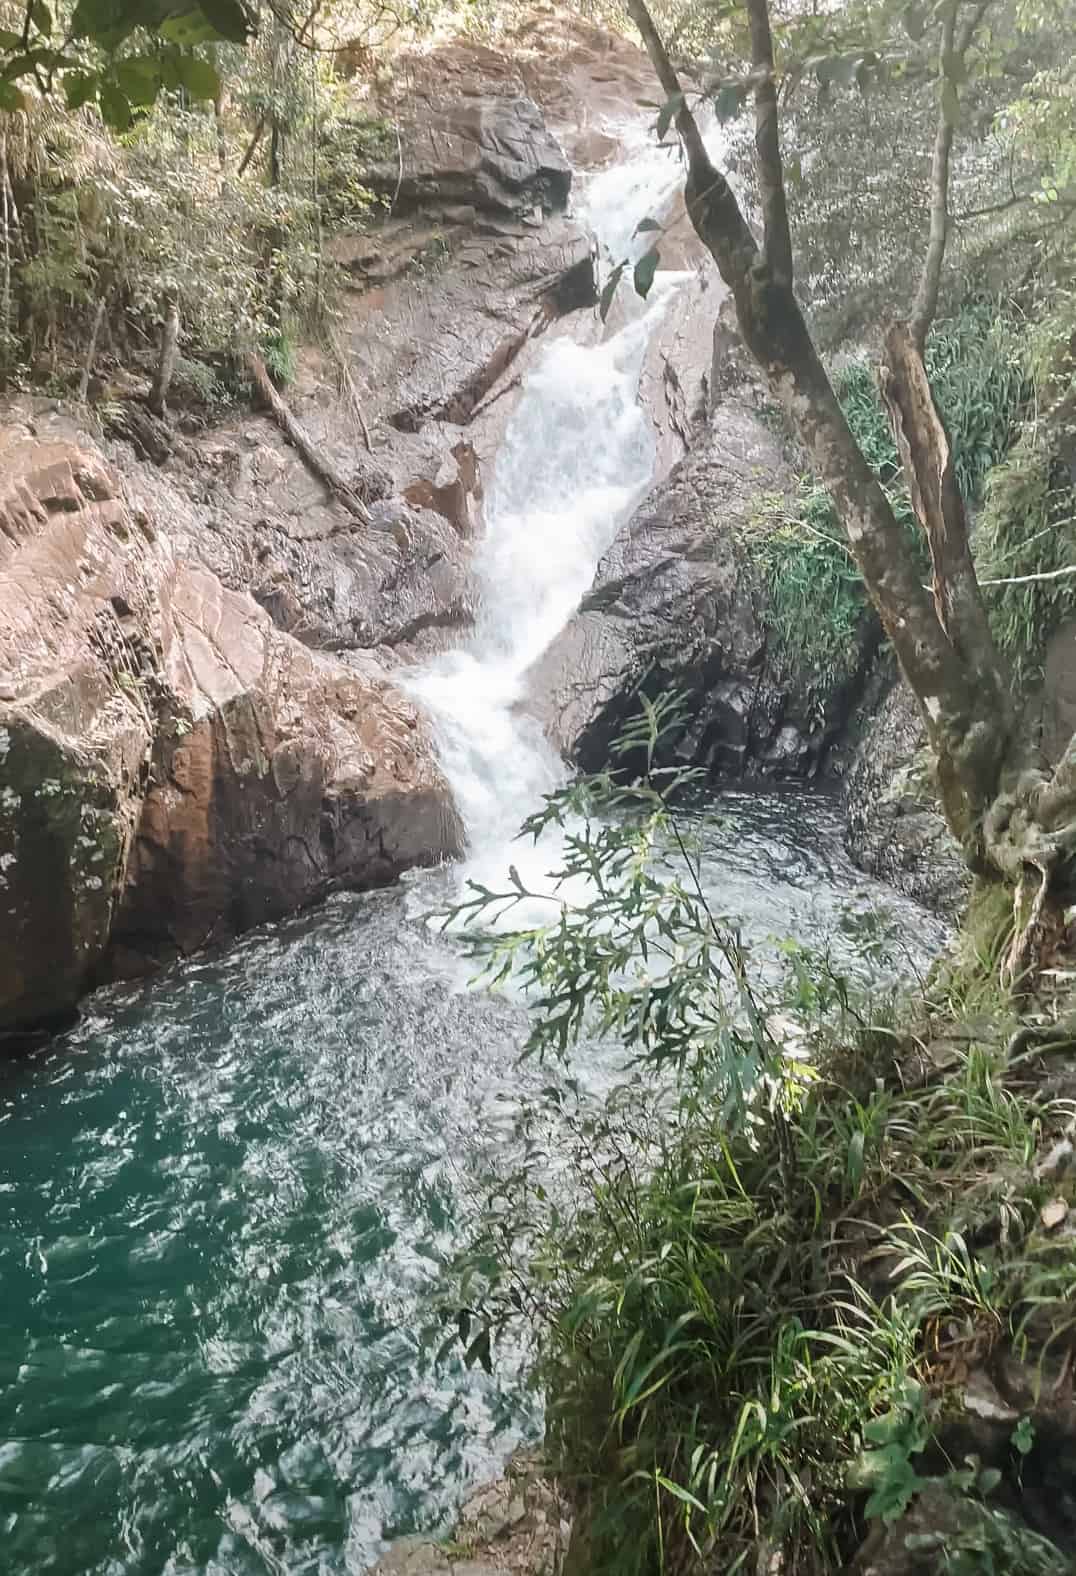 Finch Hatton Gorge - Everything you need to know